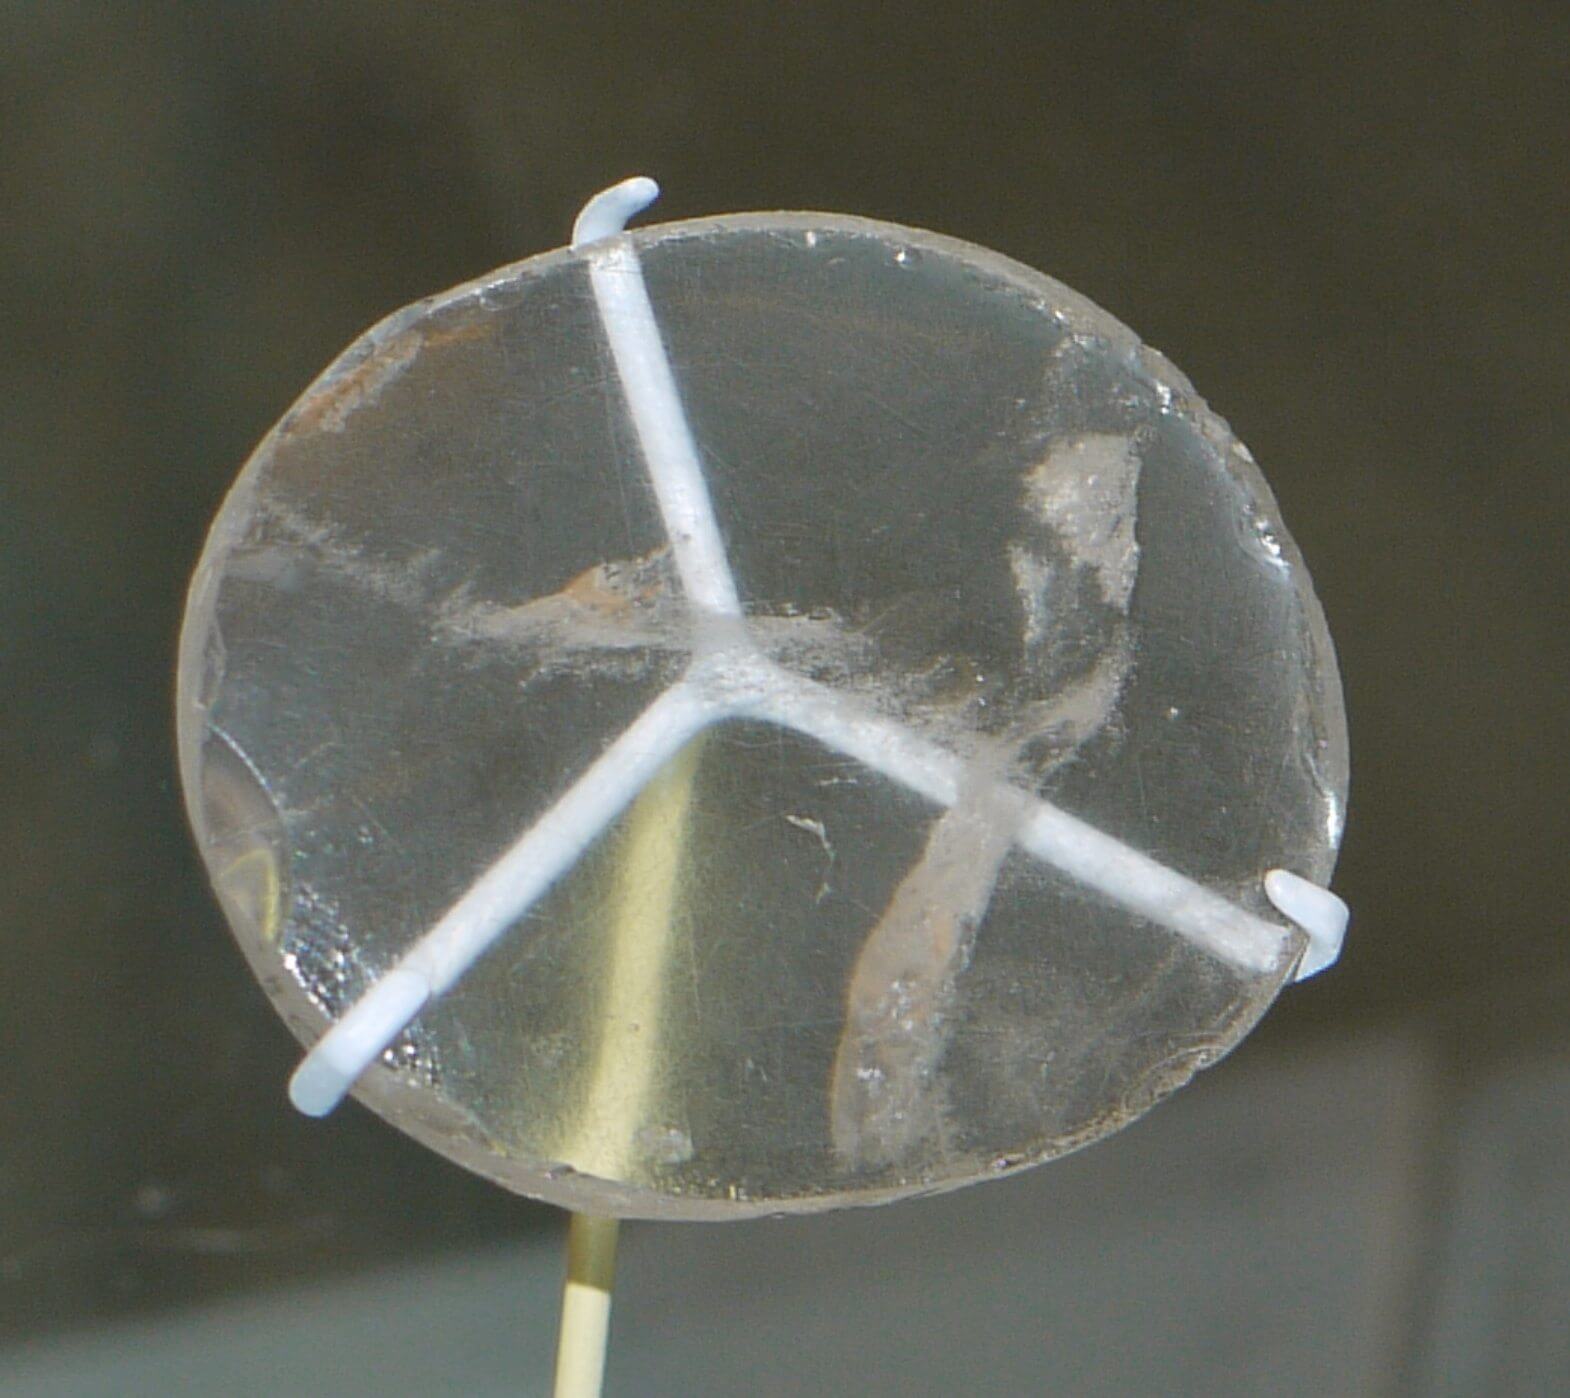 The Nimrud lens is a 3,000-year-old piece of rock crystal unearthed by Sir John Layard in 1850 at the Assyrian palace of Nimrud, in modern-day Iraq. © Wikimedia Commons